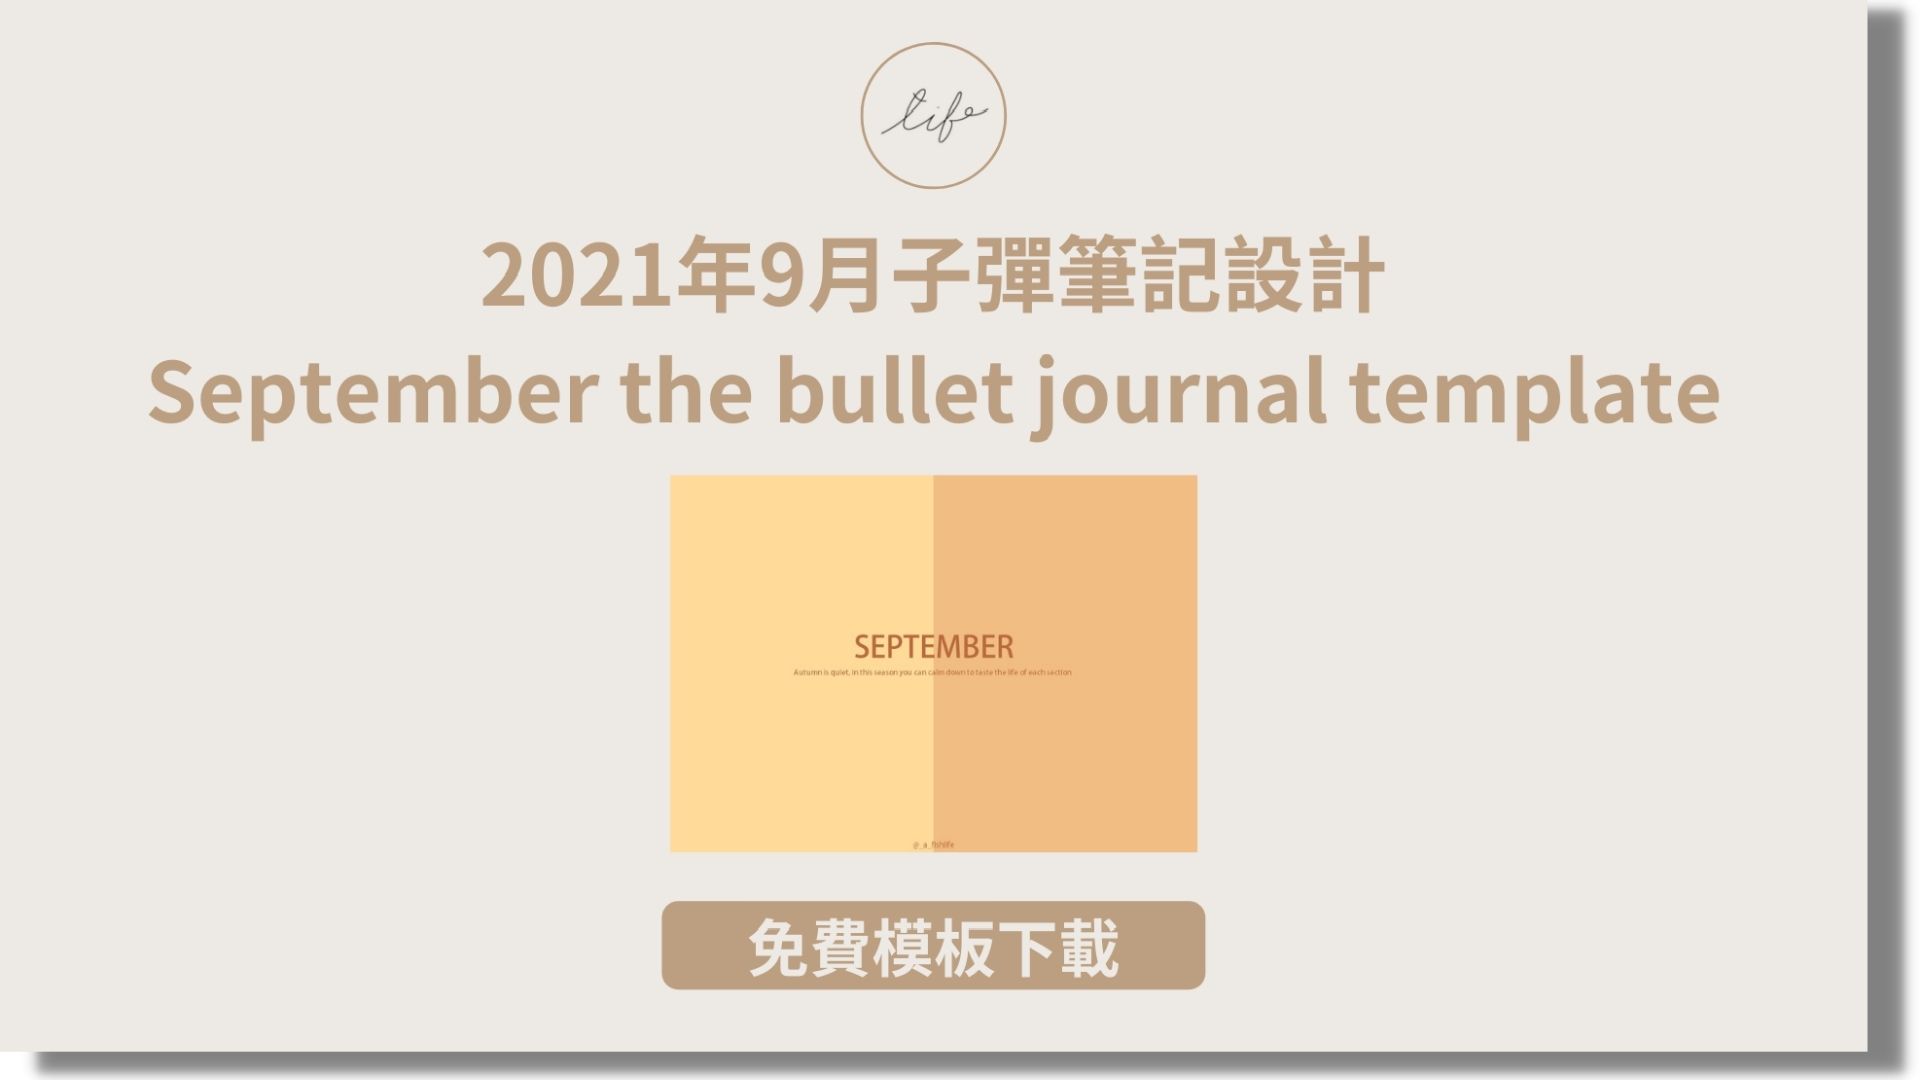 You are currently viewing 2021年9月子彈筆記設計，飲食、消費紀錄｜免費模板｜September the bullet journal template